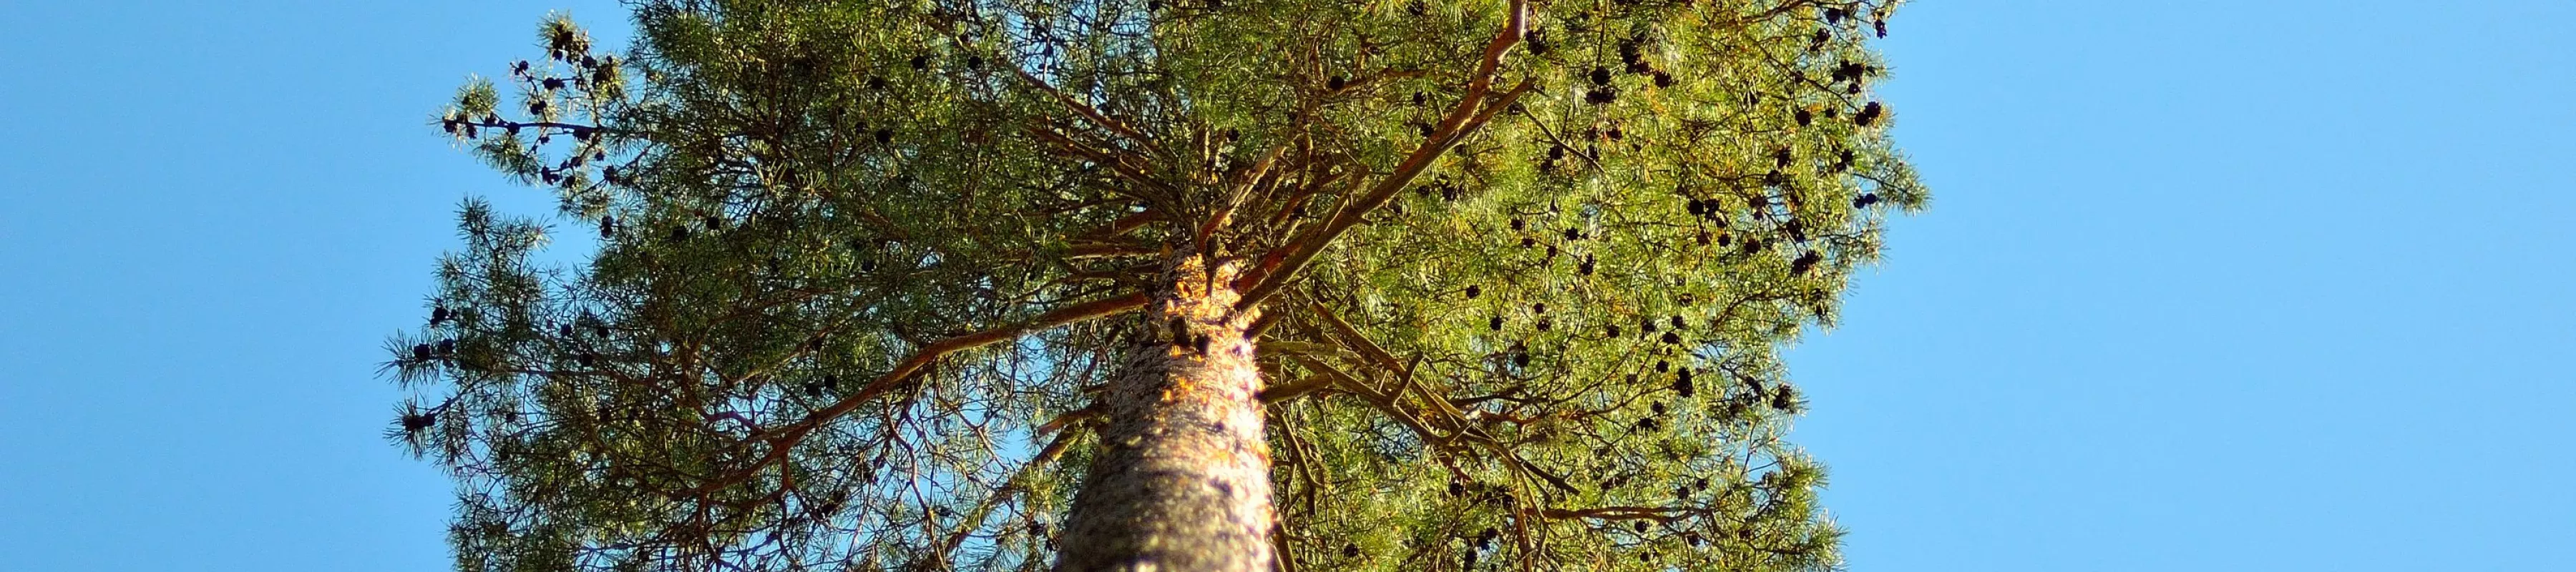 Looking up at the canopy of a scots pine from the ground